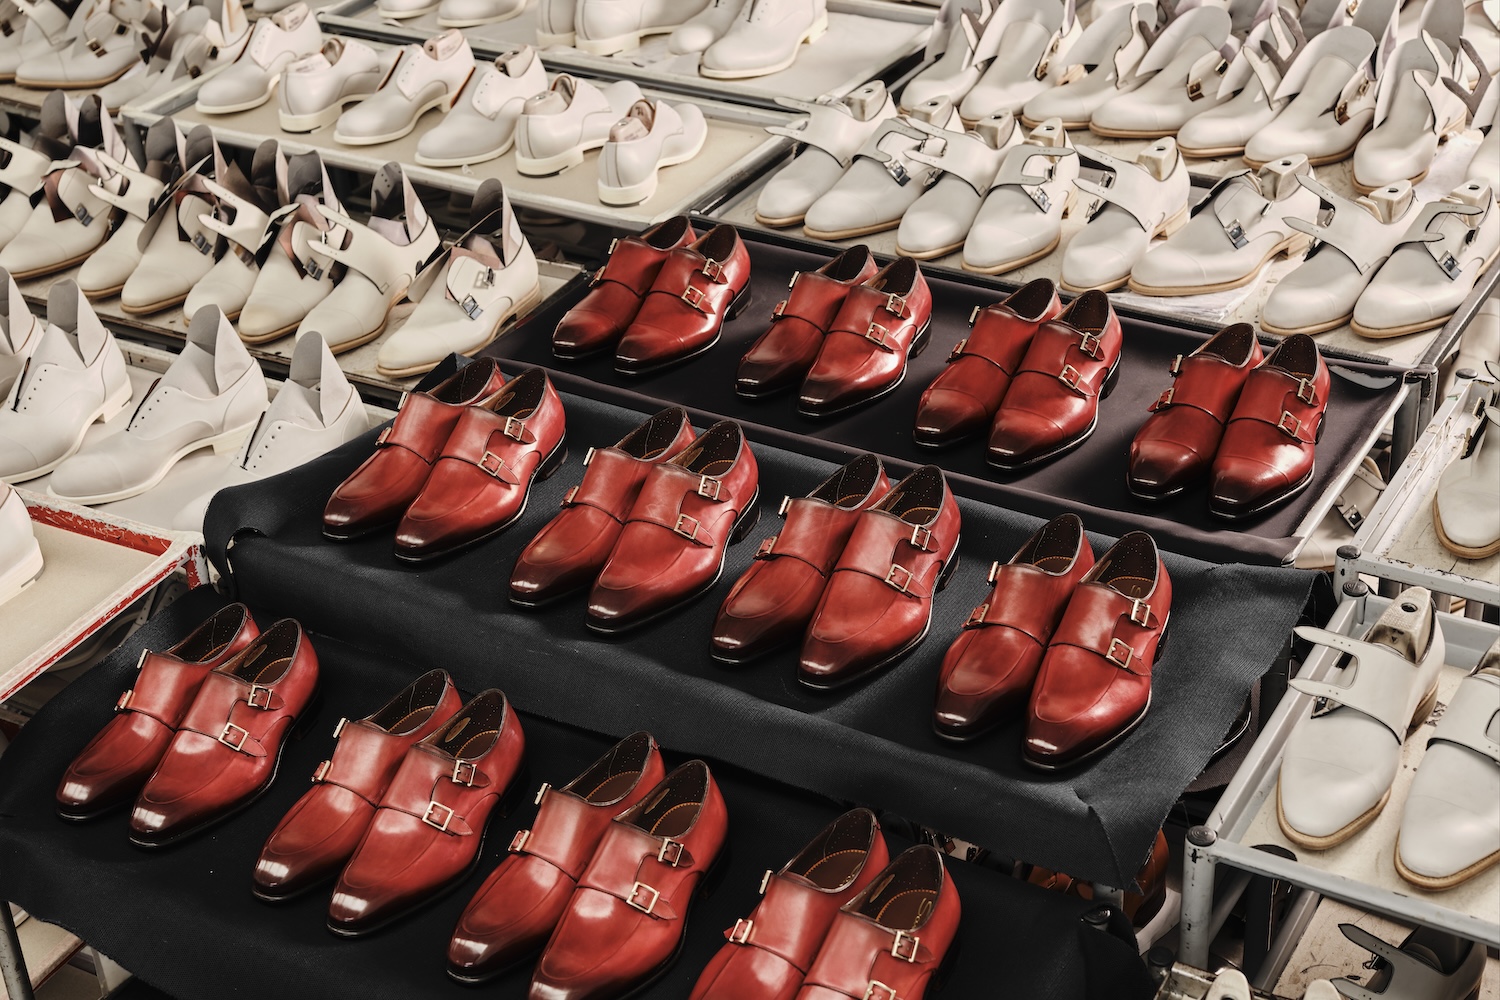 Combining traditional techniques and modern technology, Santoni is able to produce
approximately 2,500 pairs of handmade shoes per day